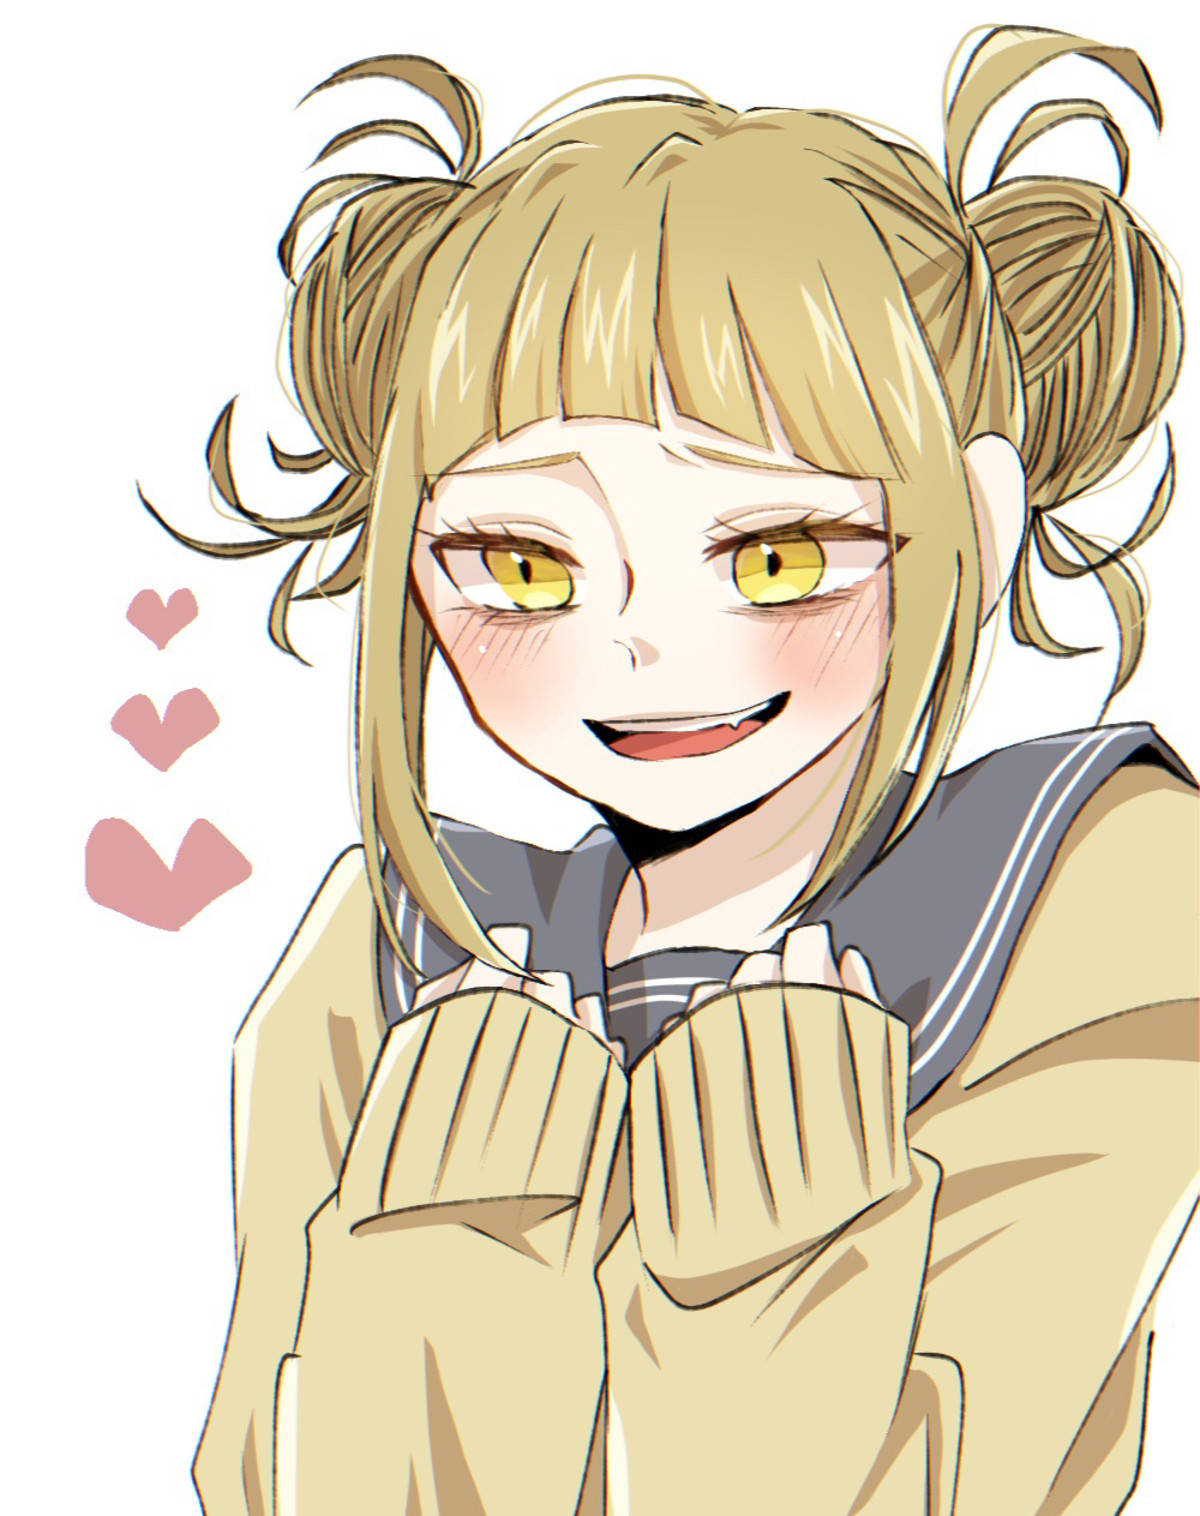 Daily Toga - 905: Toga Loves You. join list: DailyToga (477 subs)Mention History Source: .